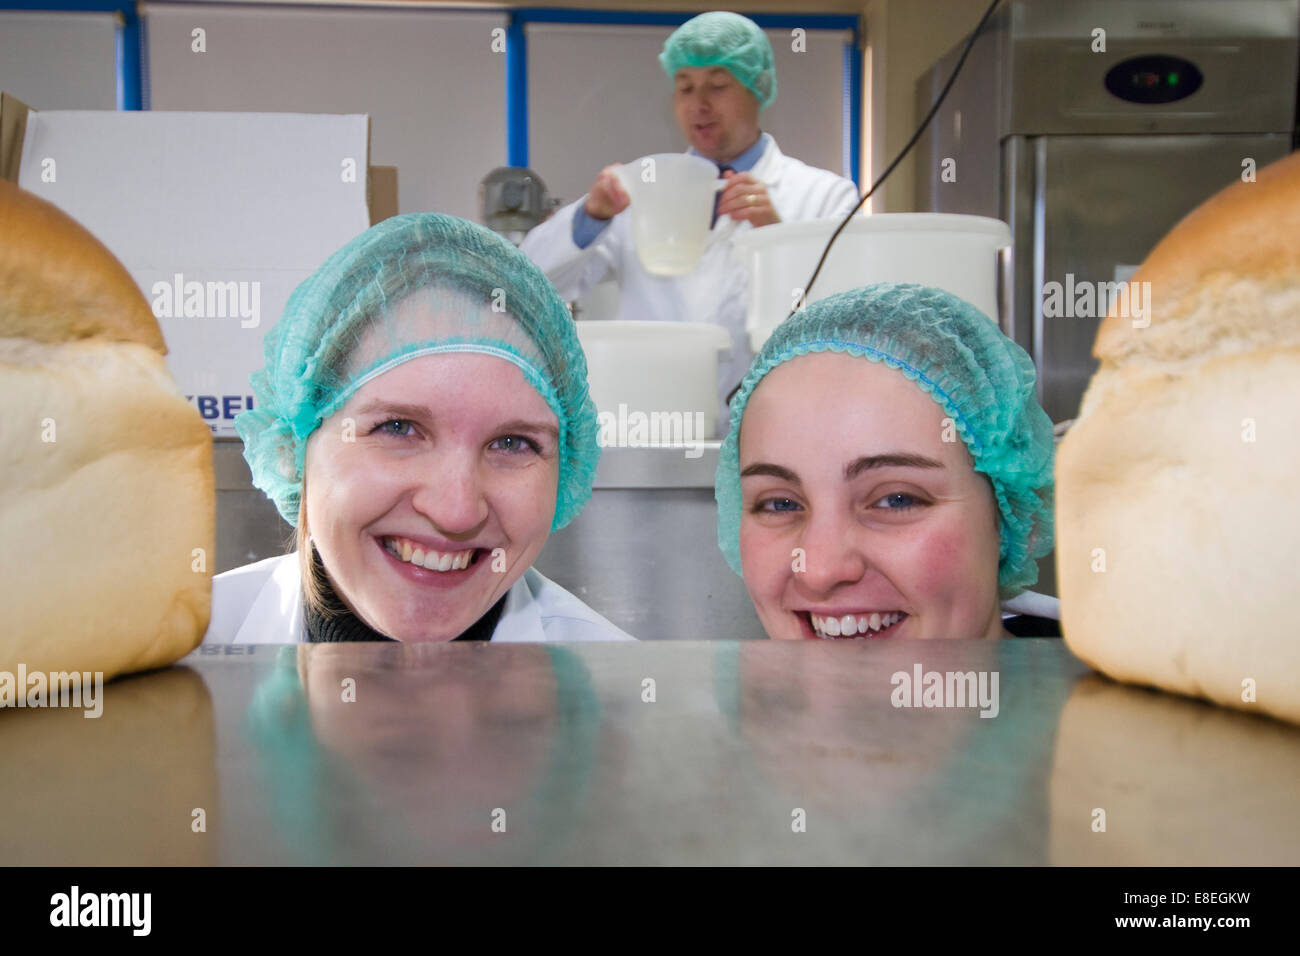 Bread development technologists, showing how bread is developed and baked Stock Photo